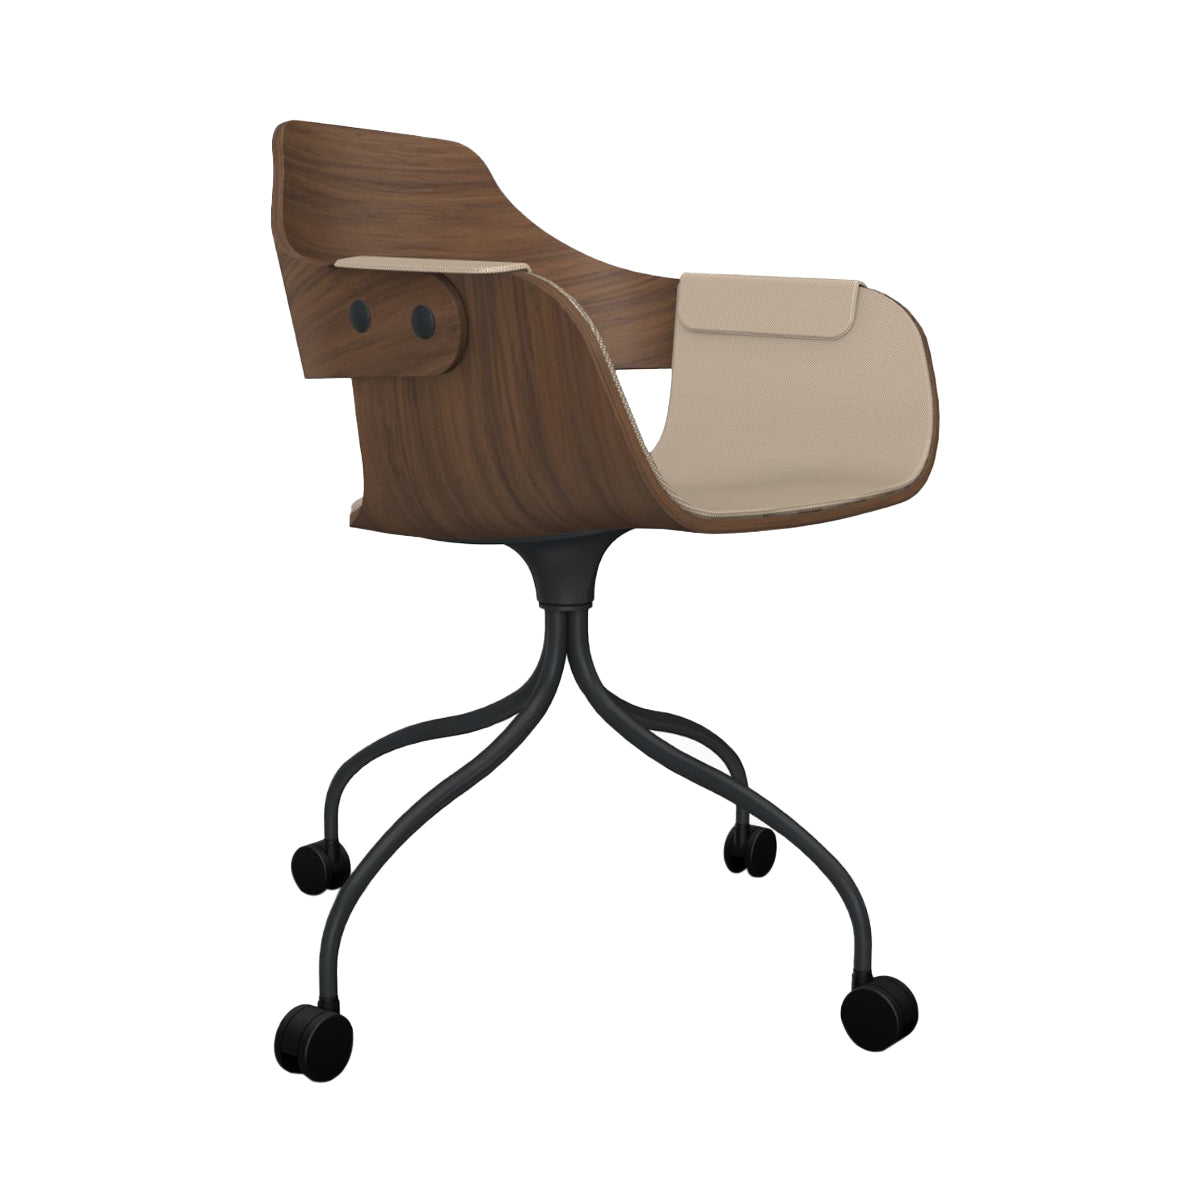 Showtime Chair with Wheel: Interior Seat + Armrest Upholstered + Anthracite Grey